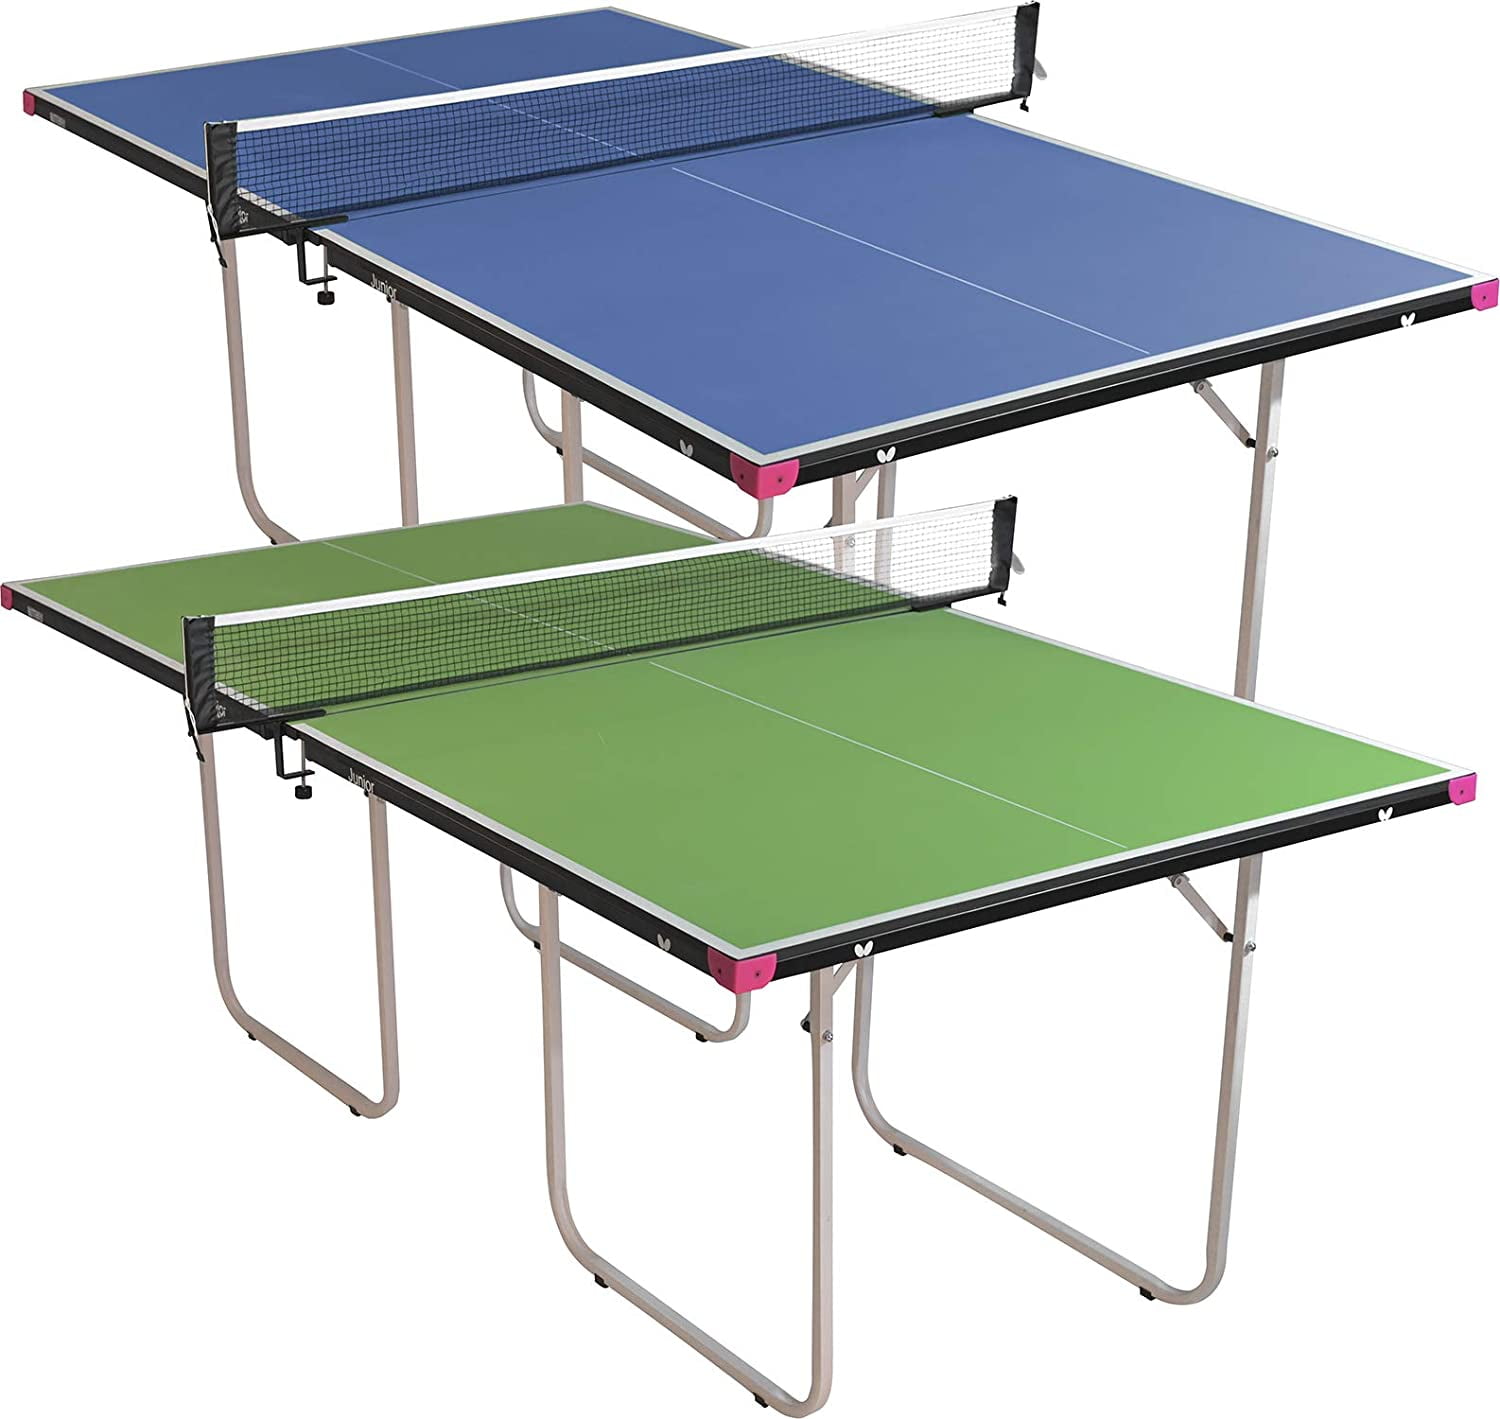 Ping Pong Table Official Size or Game Rooms Folds with Wheels Sturdy Frame for Schools Rec Centers 3 Year Warranty Ping Pong Table Butterfly Premium 19 Rollaway Table Tennis Table 